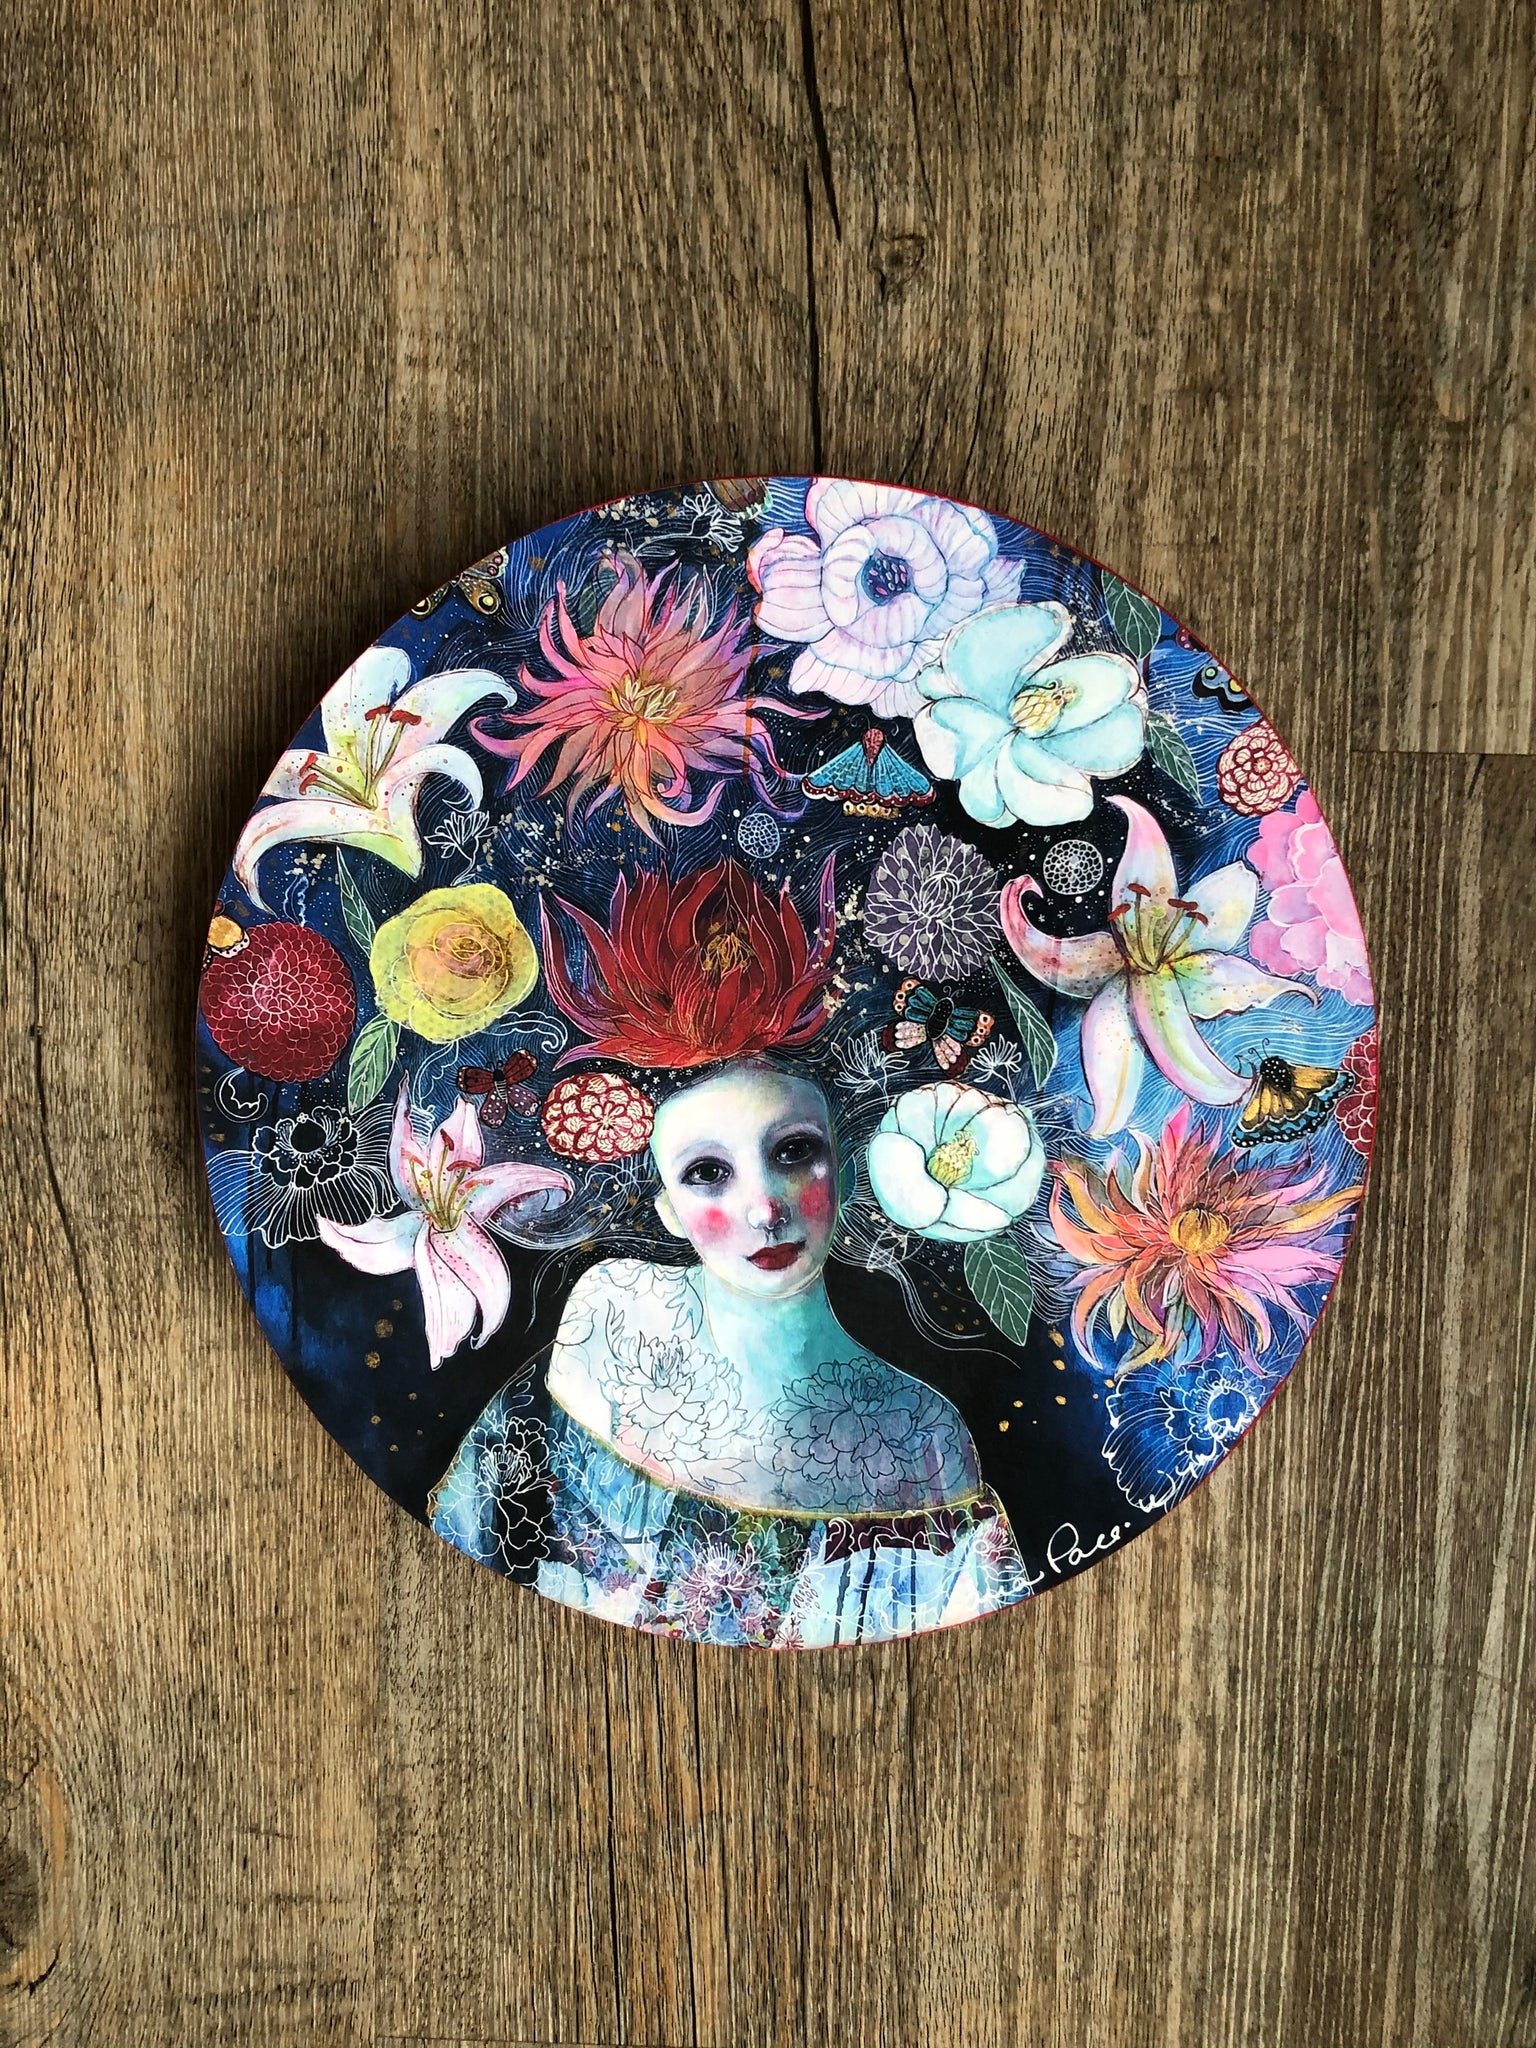 Maria Pace Wynters {OOAK Reproduction}